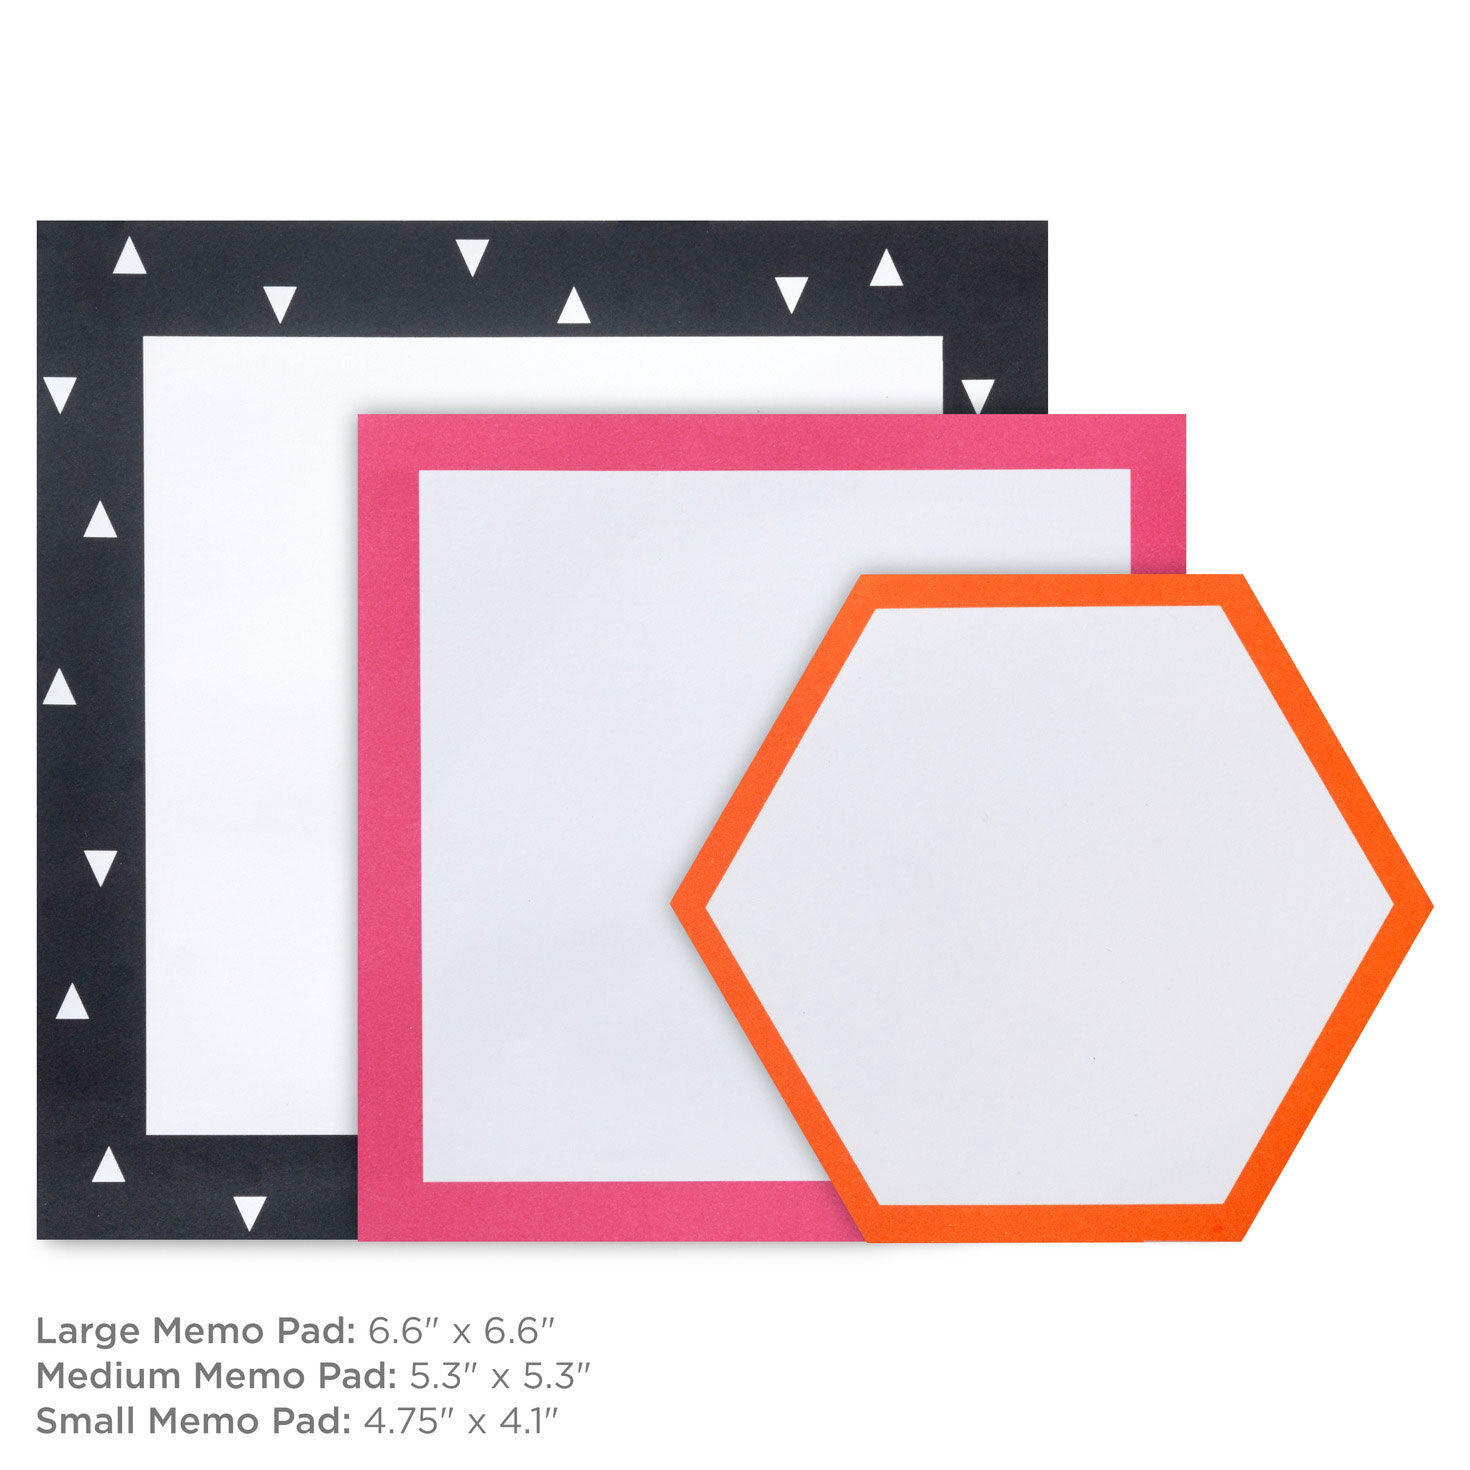 Black, Pink and Orange Memo Pad 3-Pack for only USD 13.99 | Hallmark